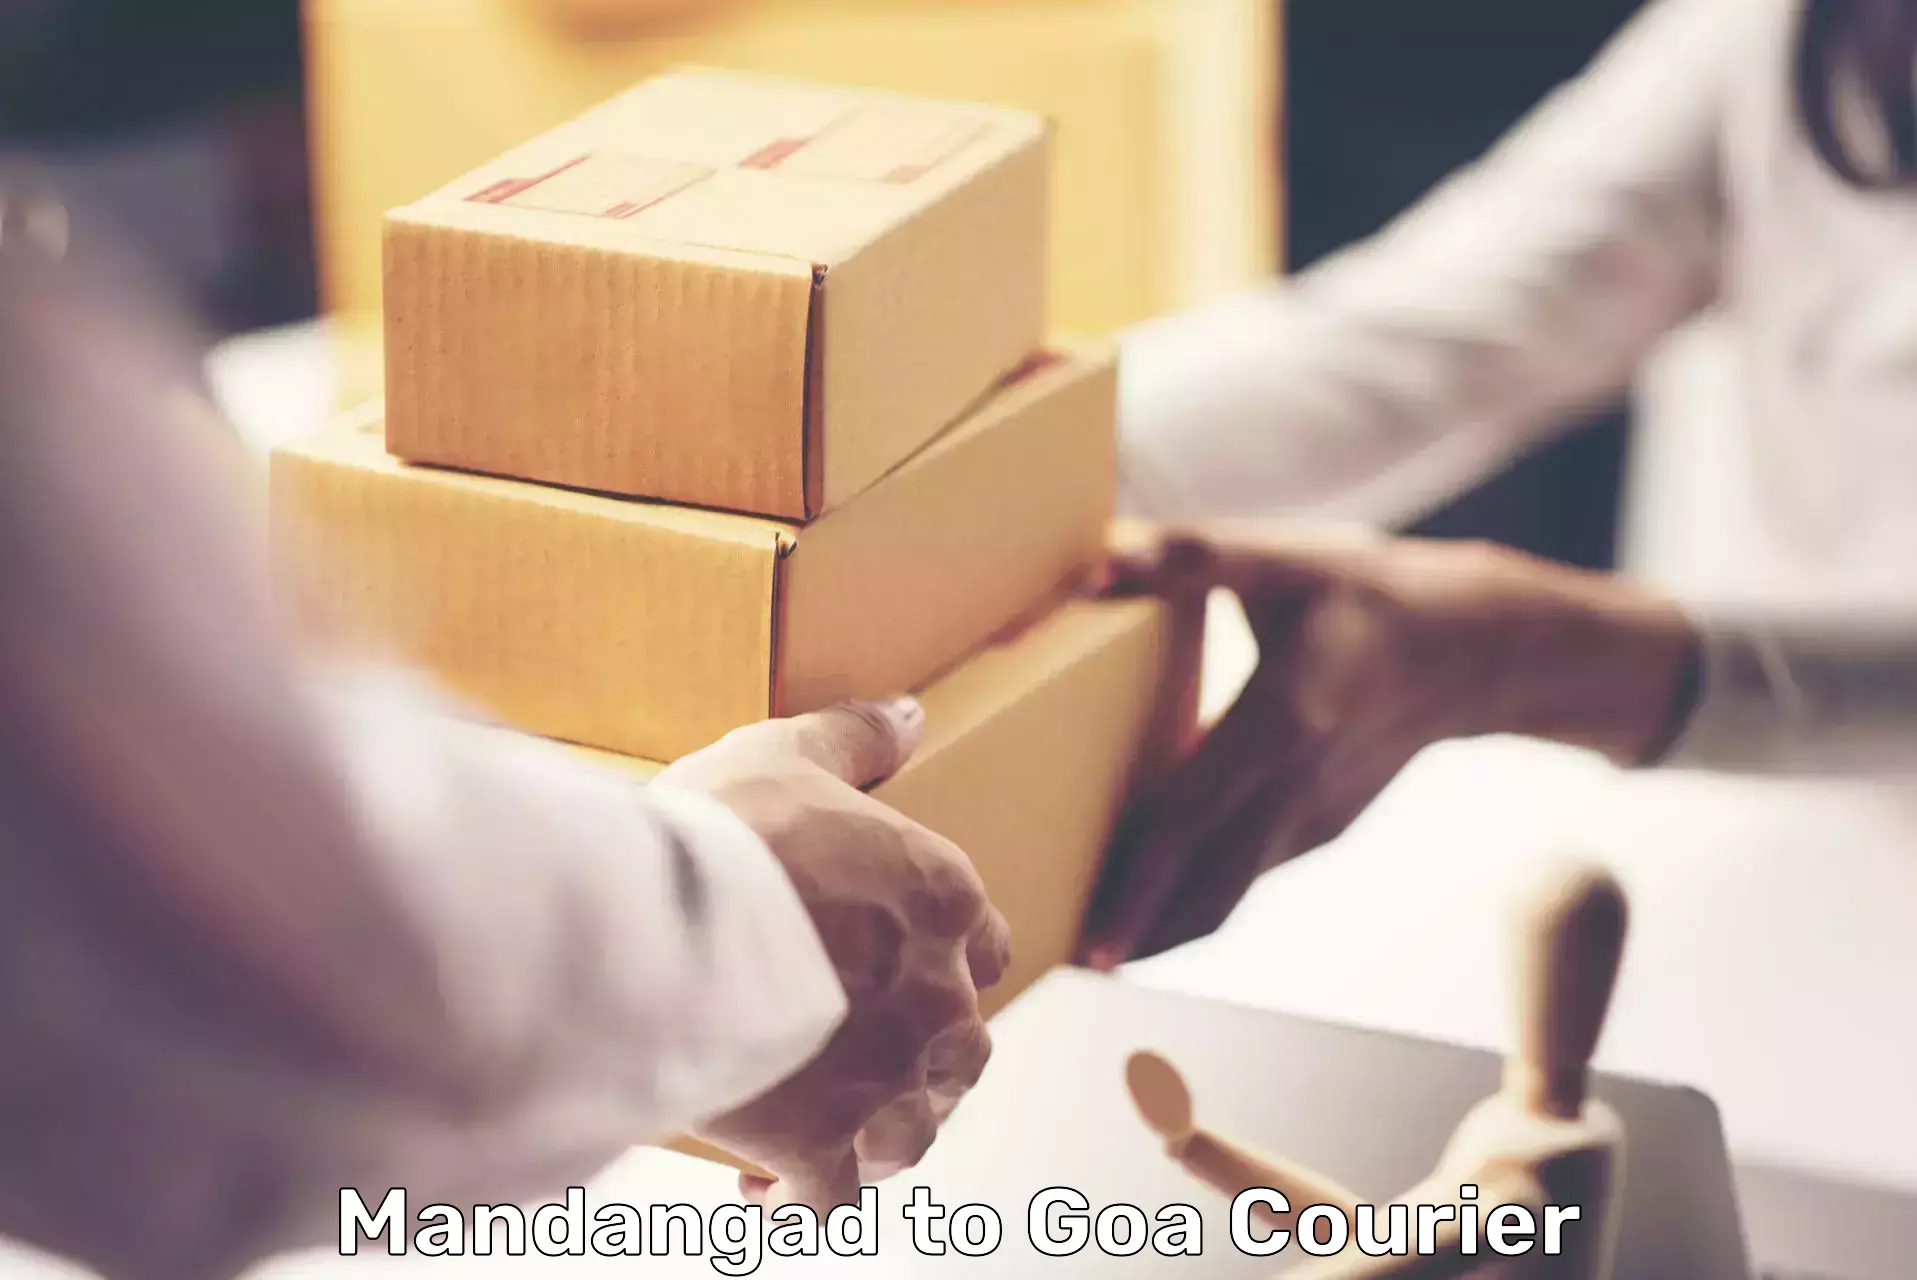 Efficient shipping operations Mandangad to South Goa